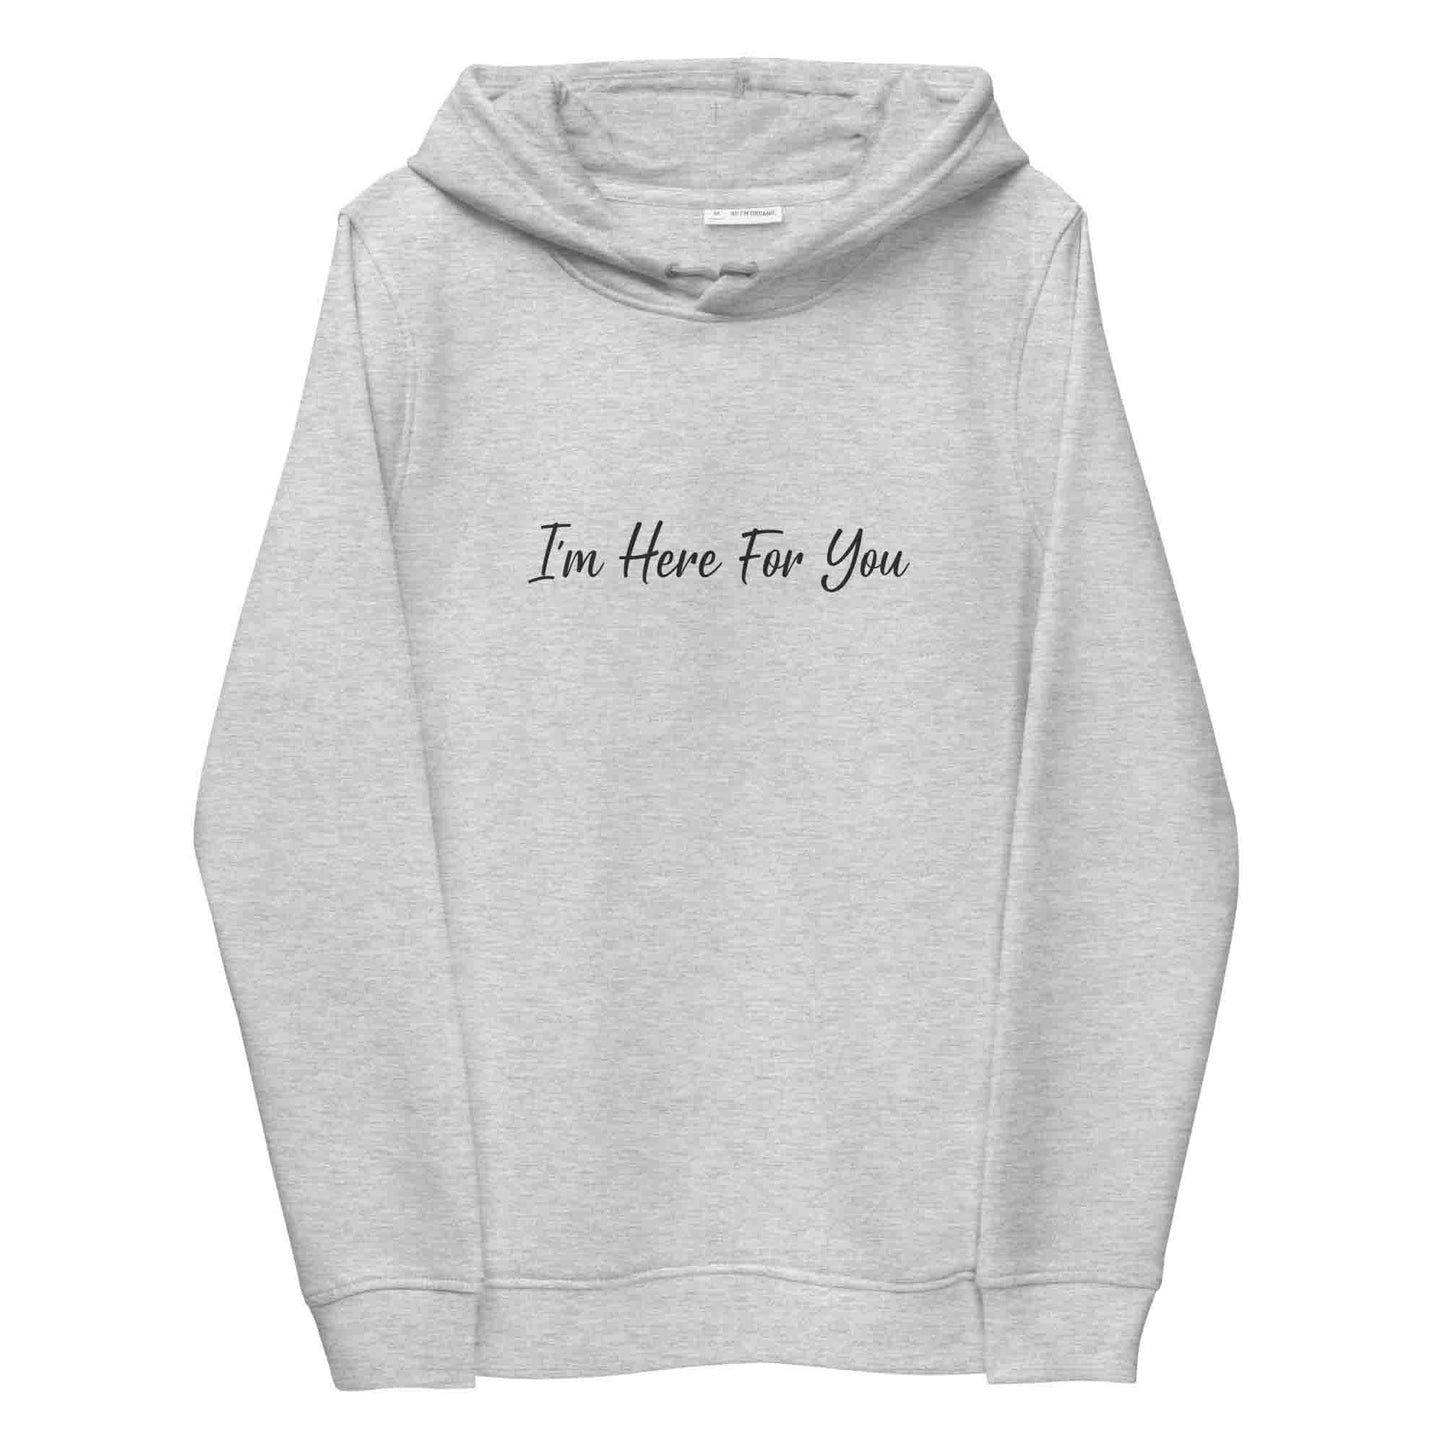 Women gray positive hoodie with inspirational quote, "I'm Here For You."